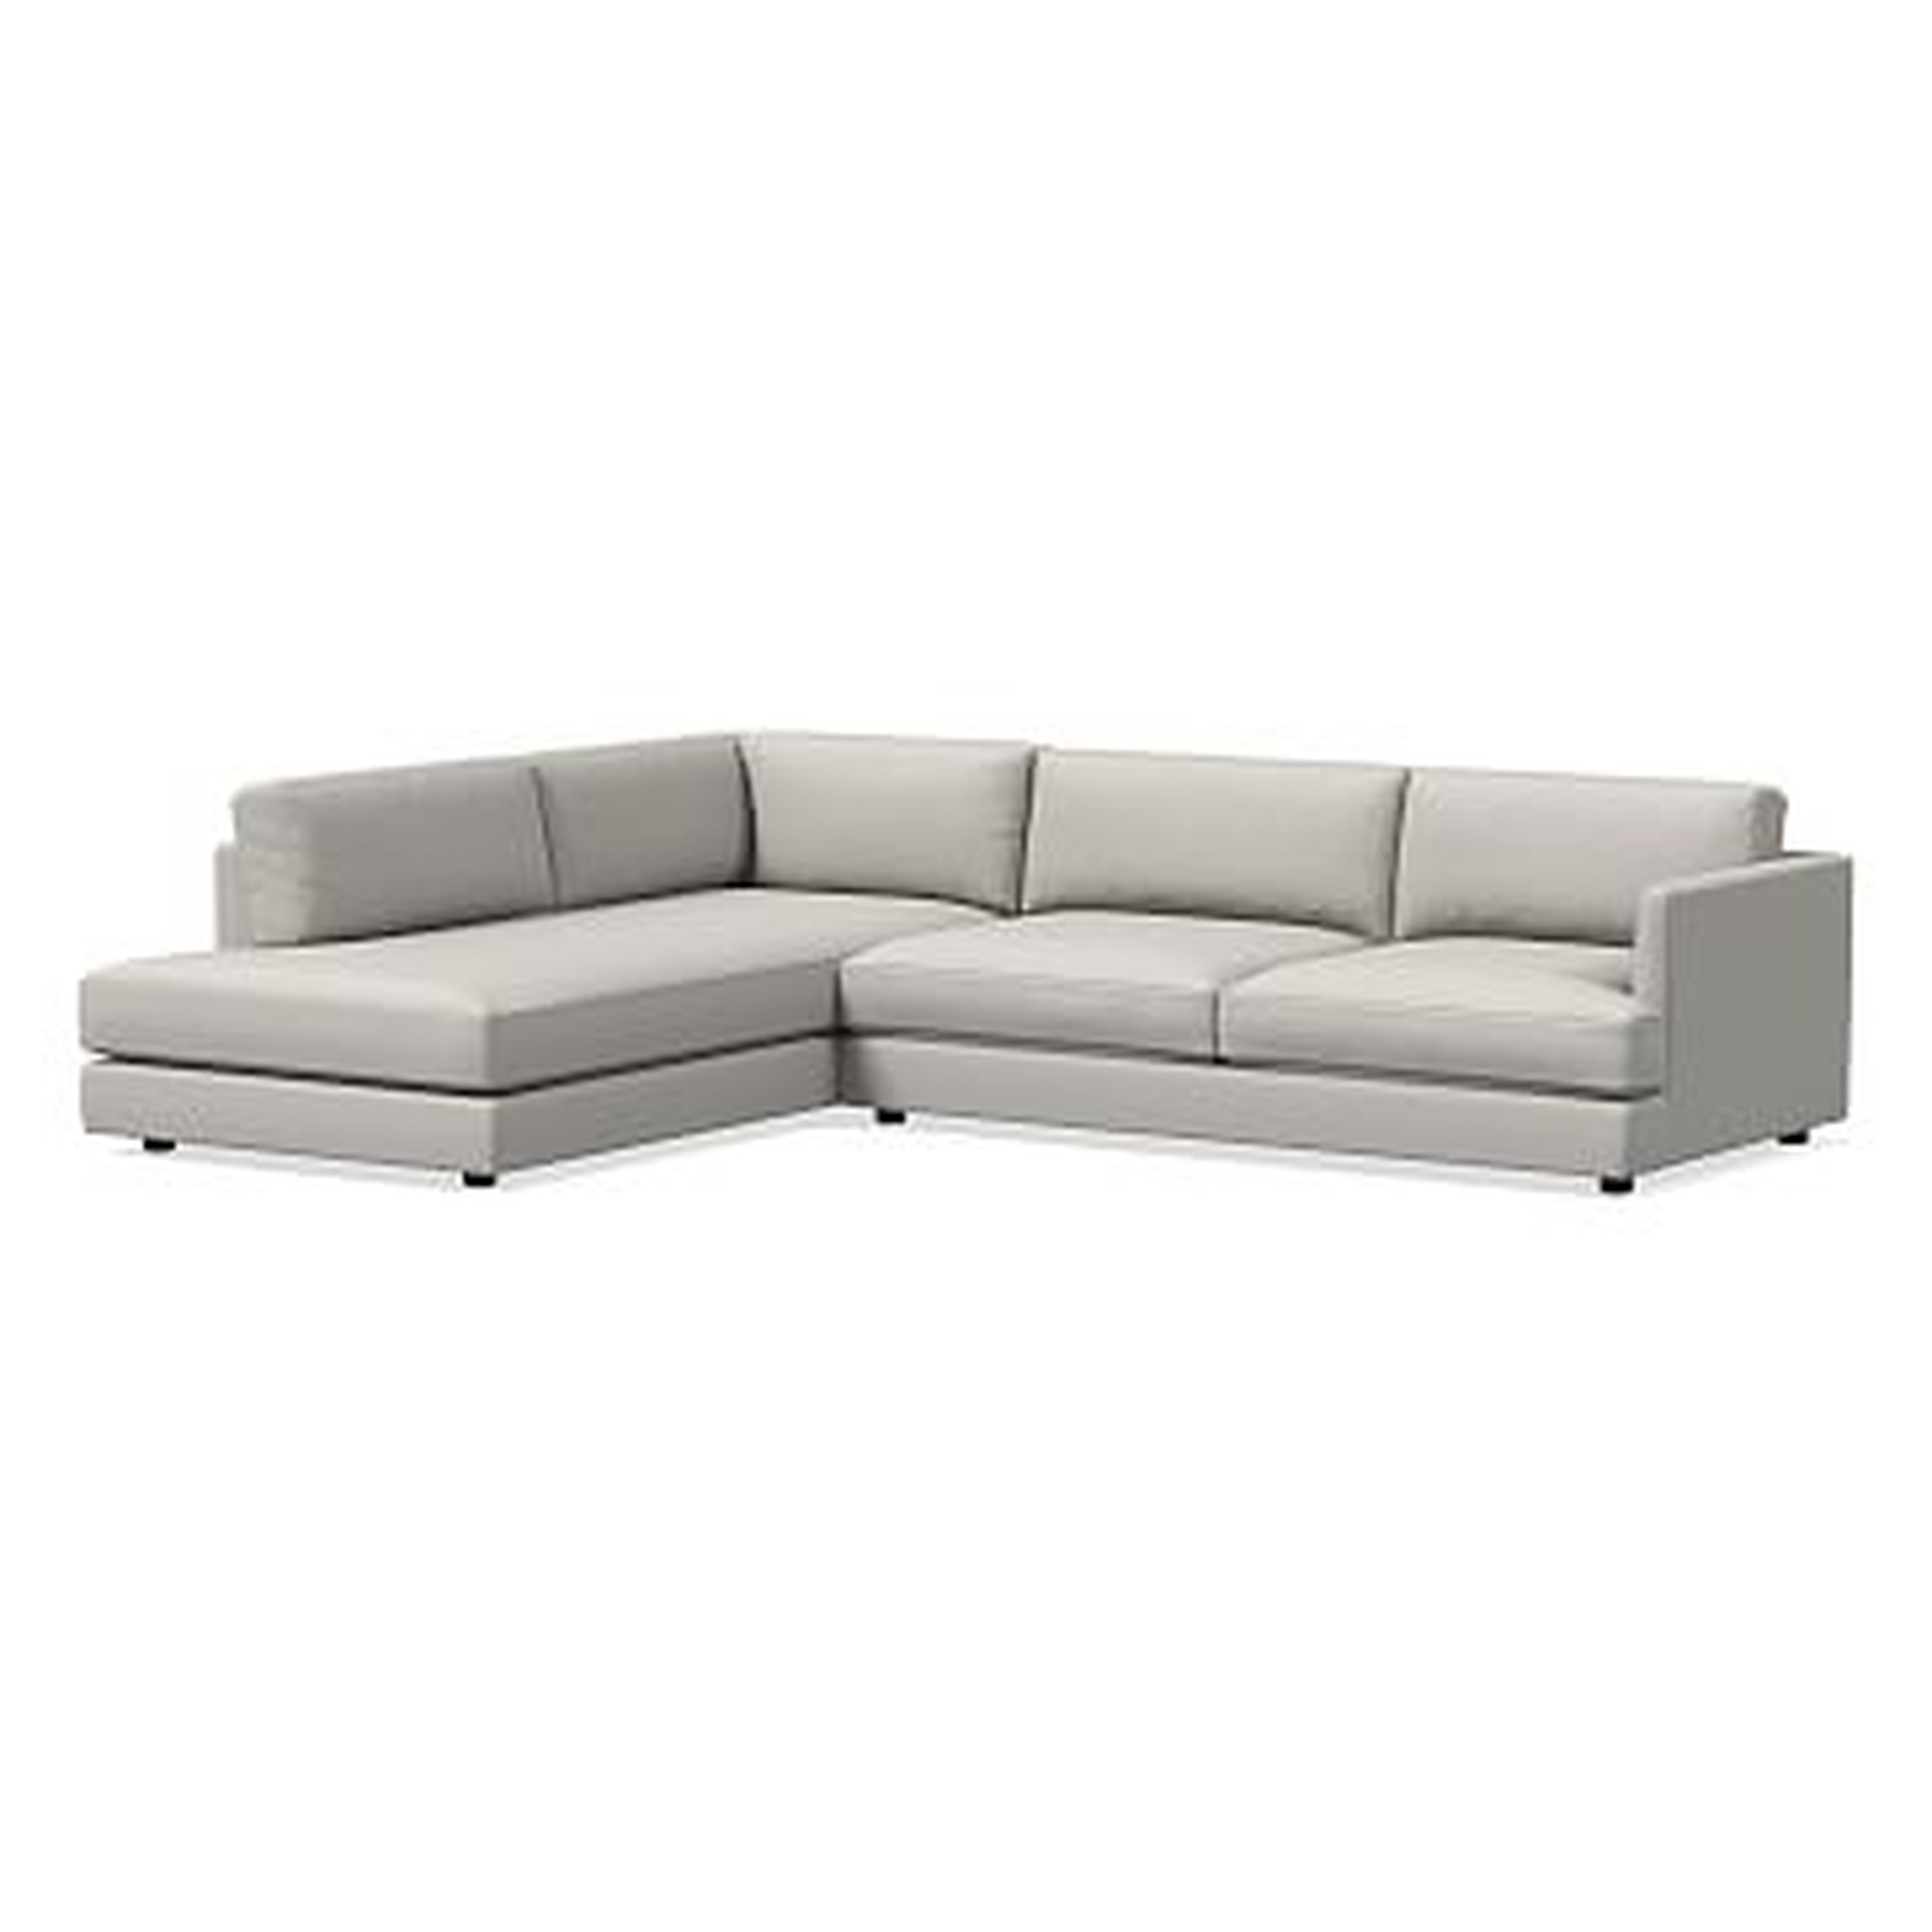 Haven Sectional Set 06: XL Right Arm Sofa, Left Arm Terminal Chaise, Poly, Performance Yarn Dyed Linen Weave, Frost Gray - West Elm